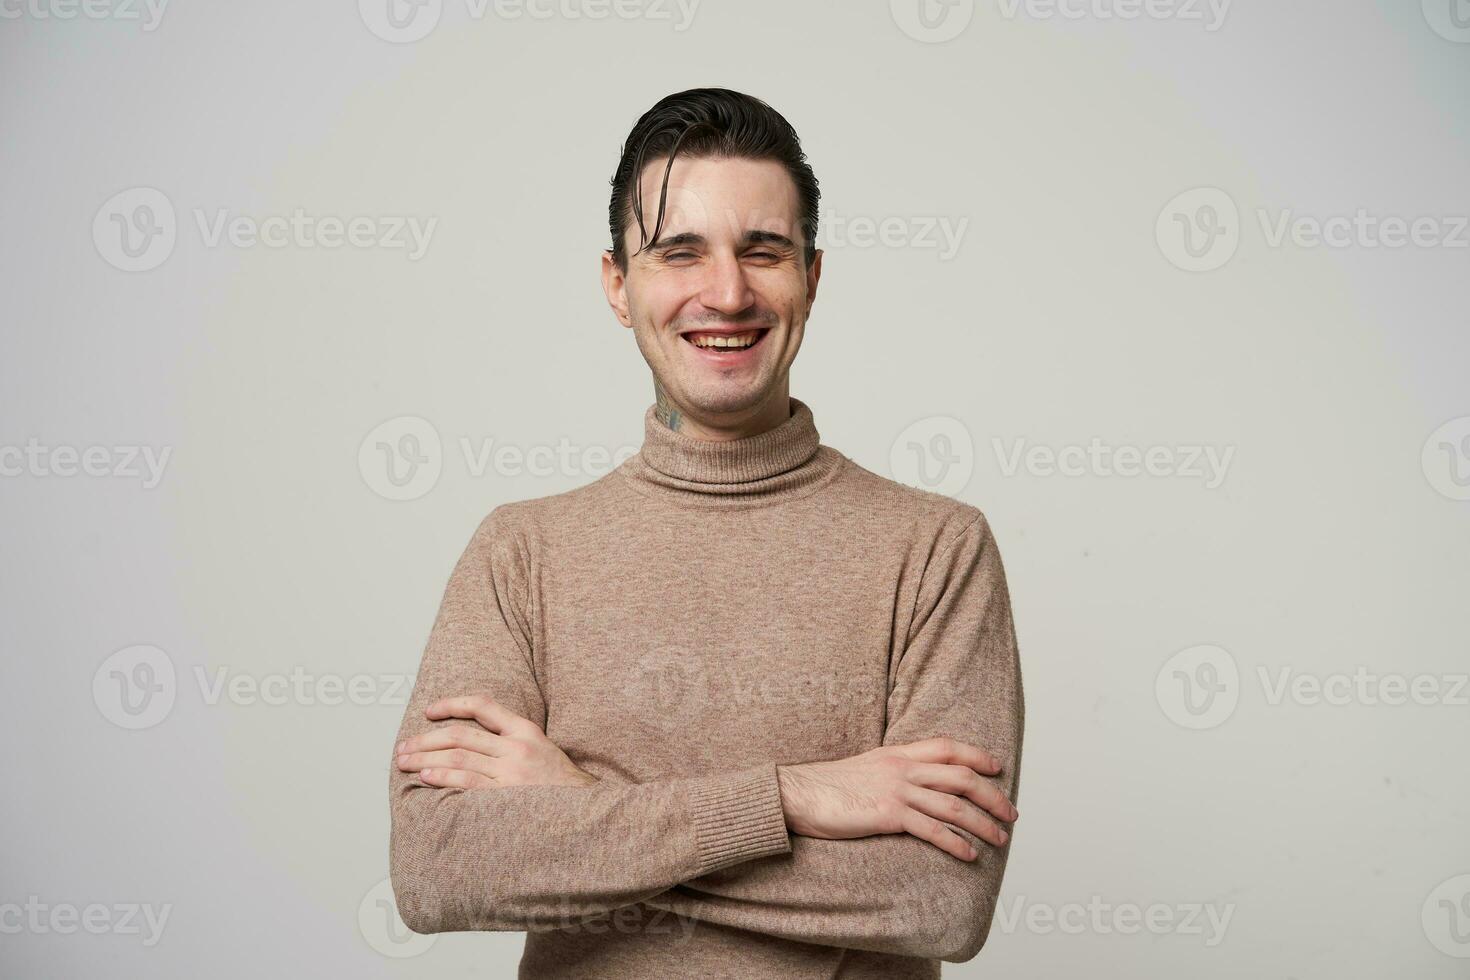 Cheerful beautiful young dark haired man with folded hands laughing happily with closed eyes while posing over white background, wearing beige roll-neck sweater photo